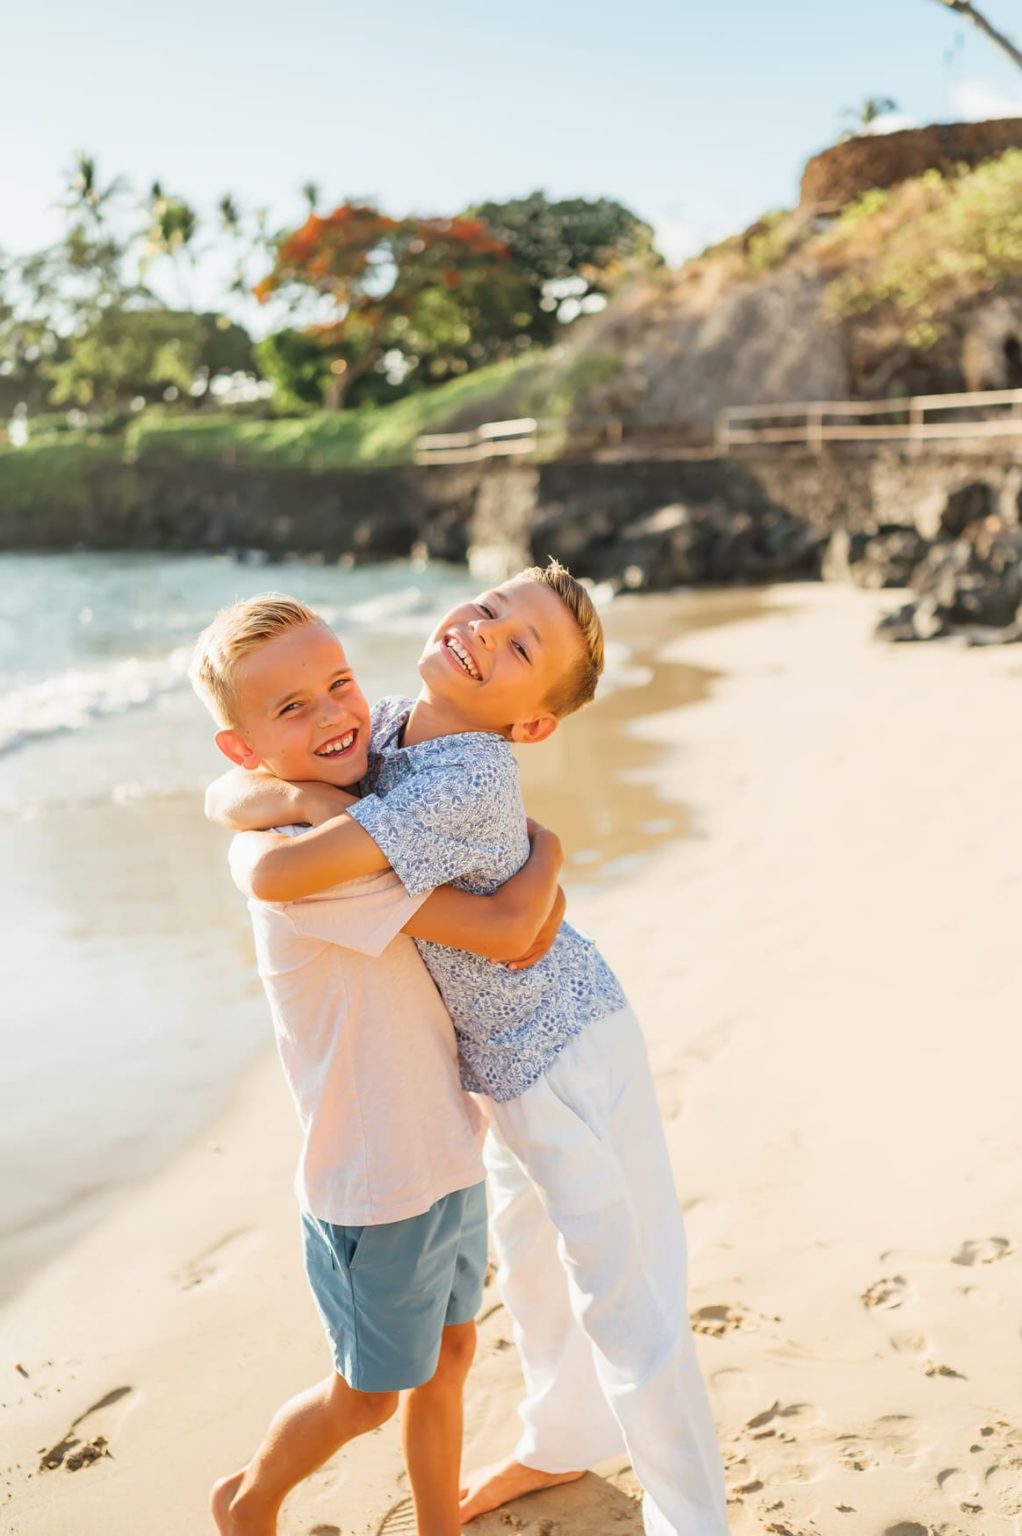 Hawaii Vacation Family Pictures - Hawaii Photographer | Wilde Sparrow ...